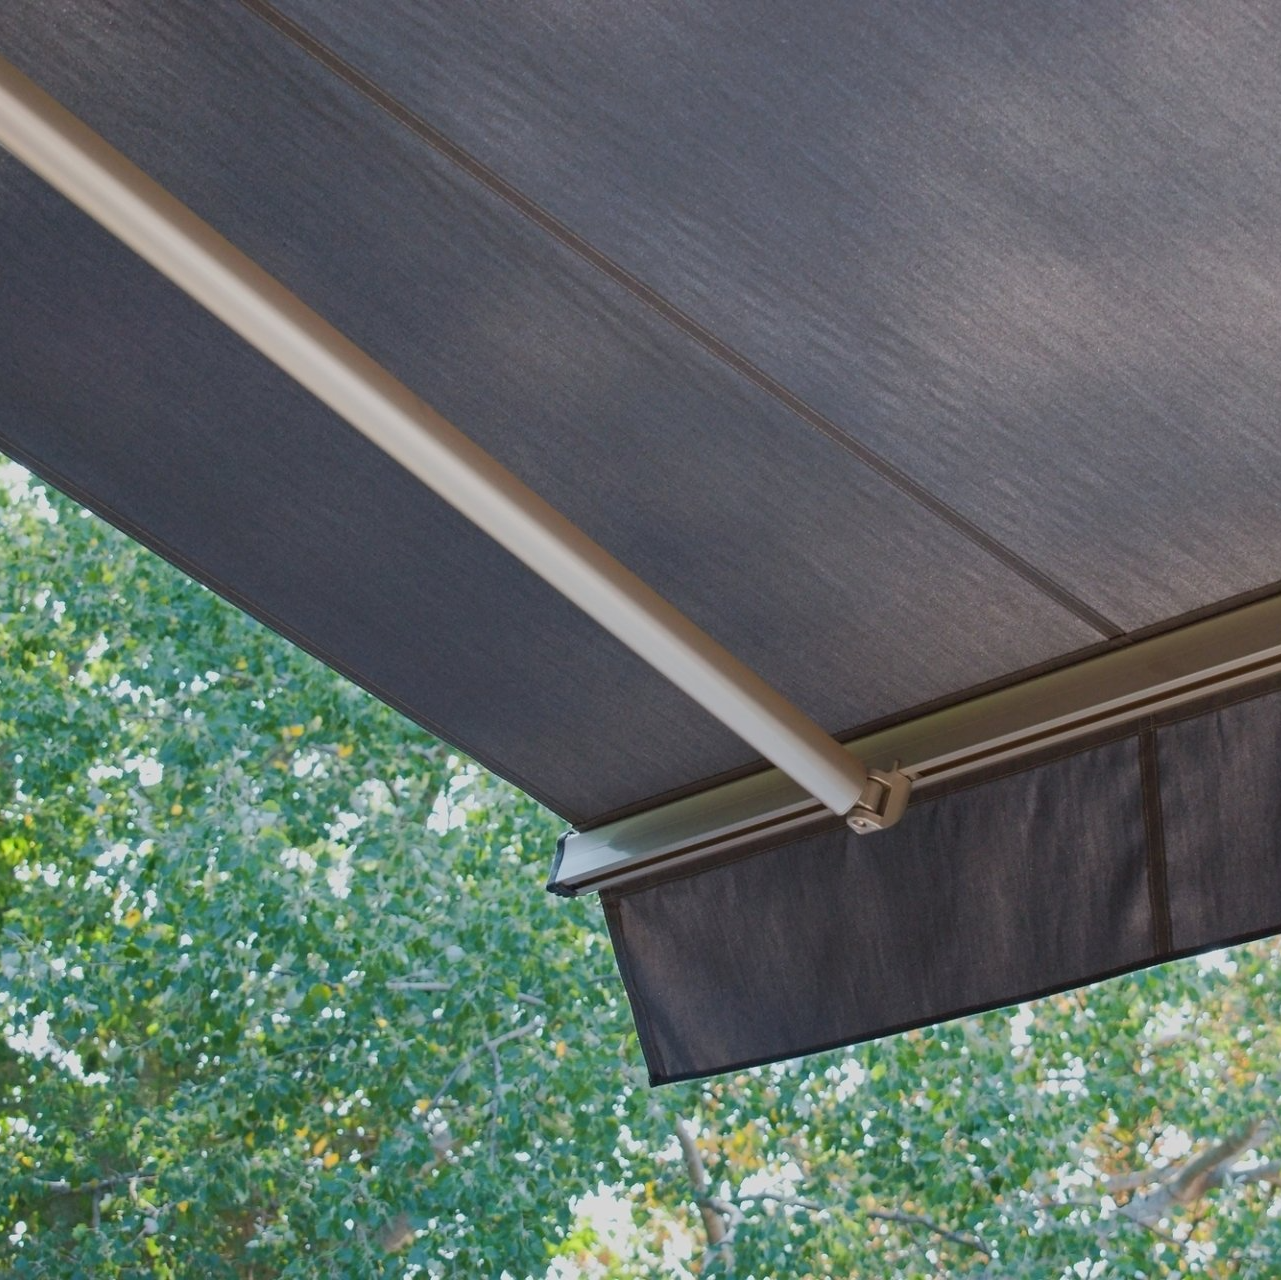 Close up of dark external awning, with green tree in background.